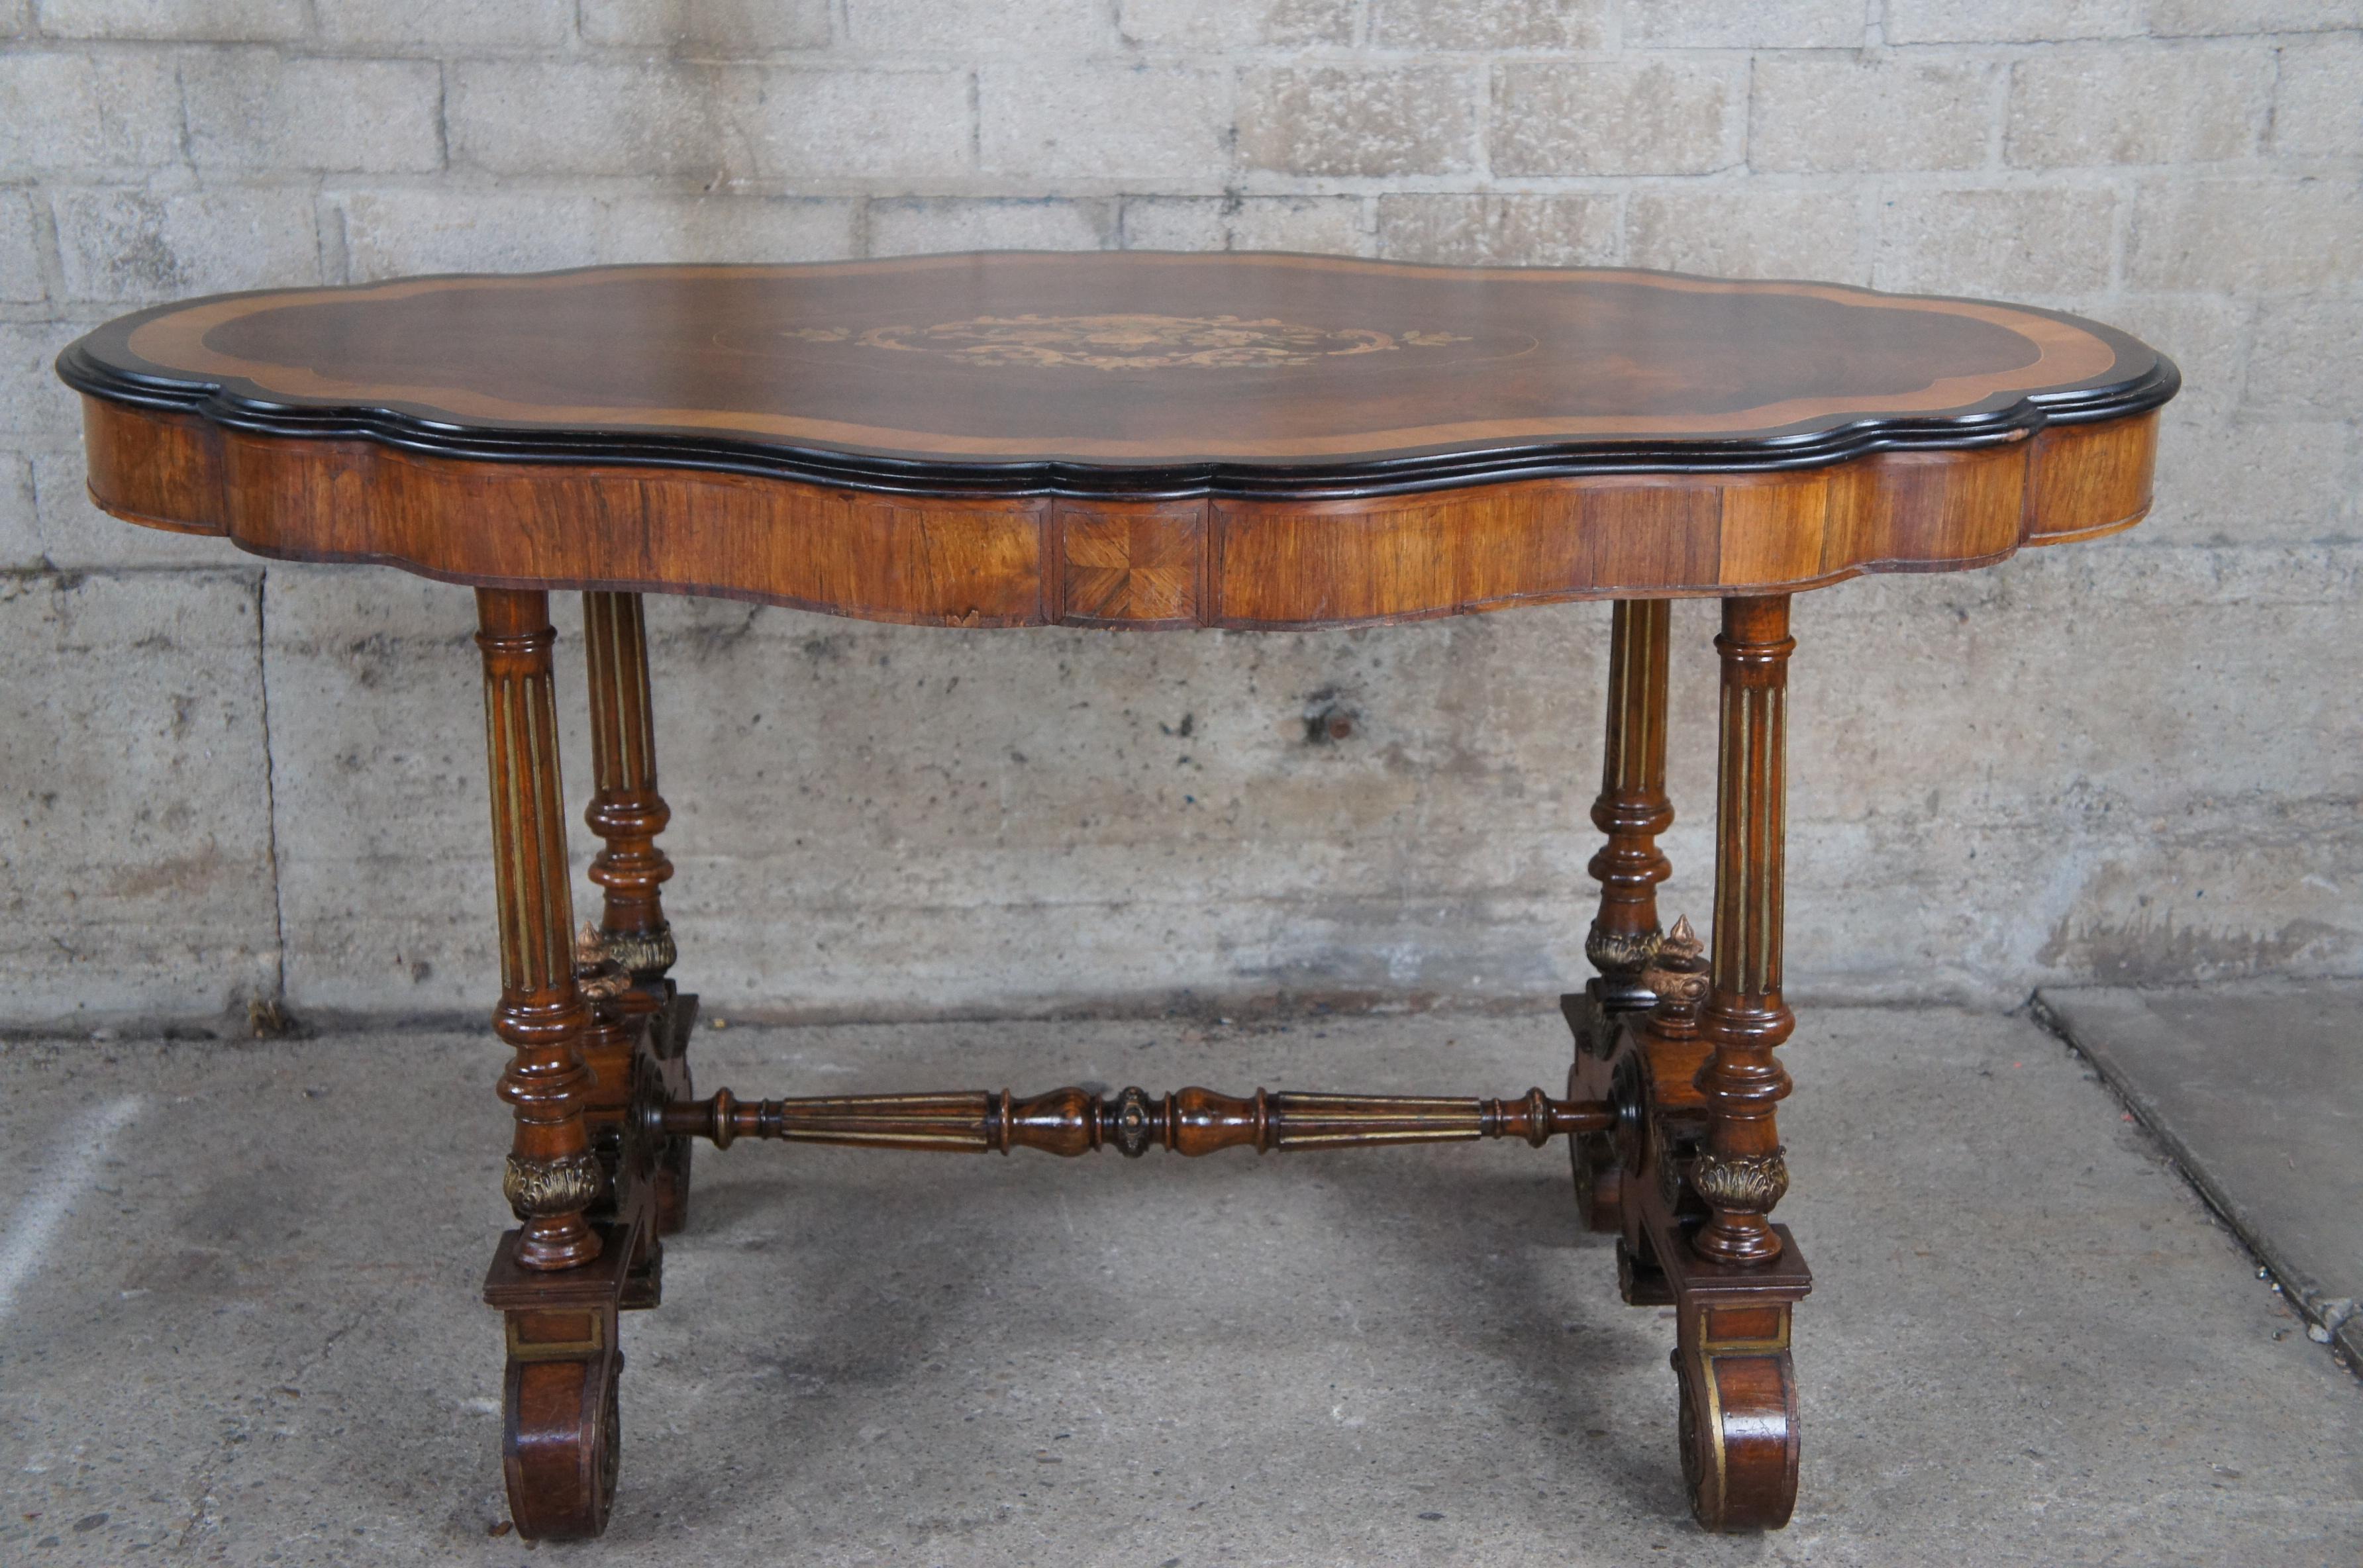 Antique American Renaissance Revival Serpentine Walnut Marquetry Center Table For Sale 5